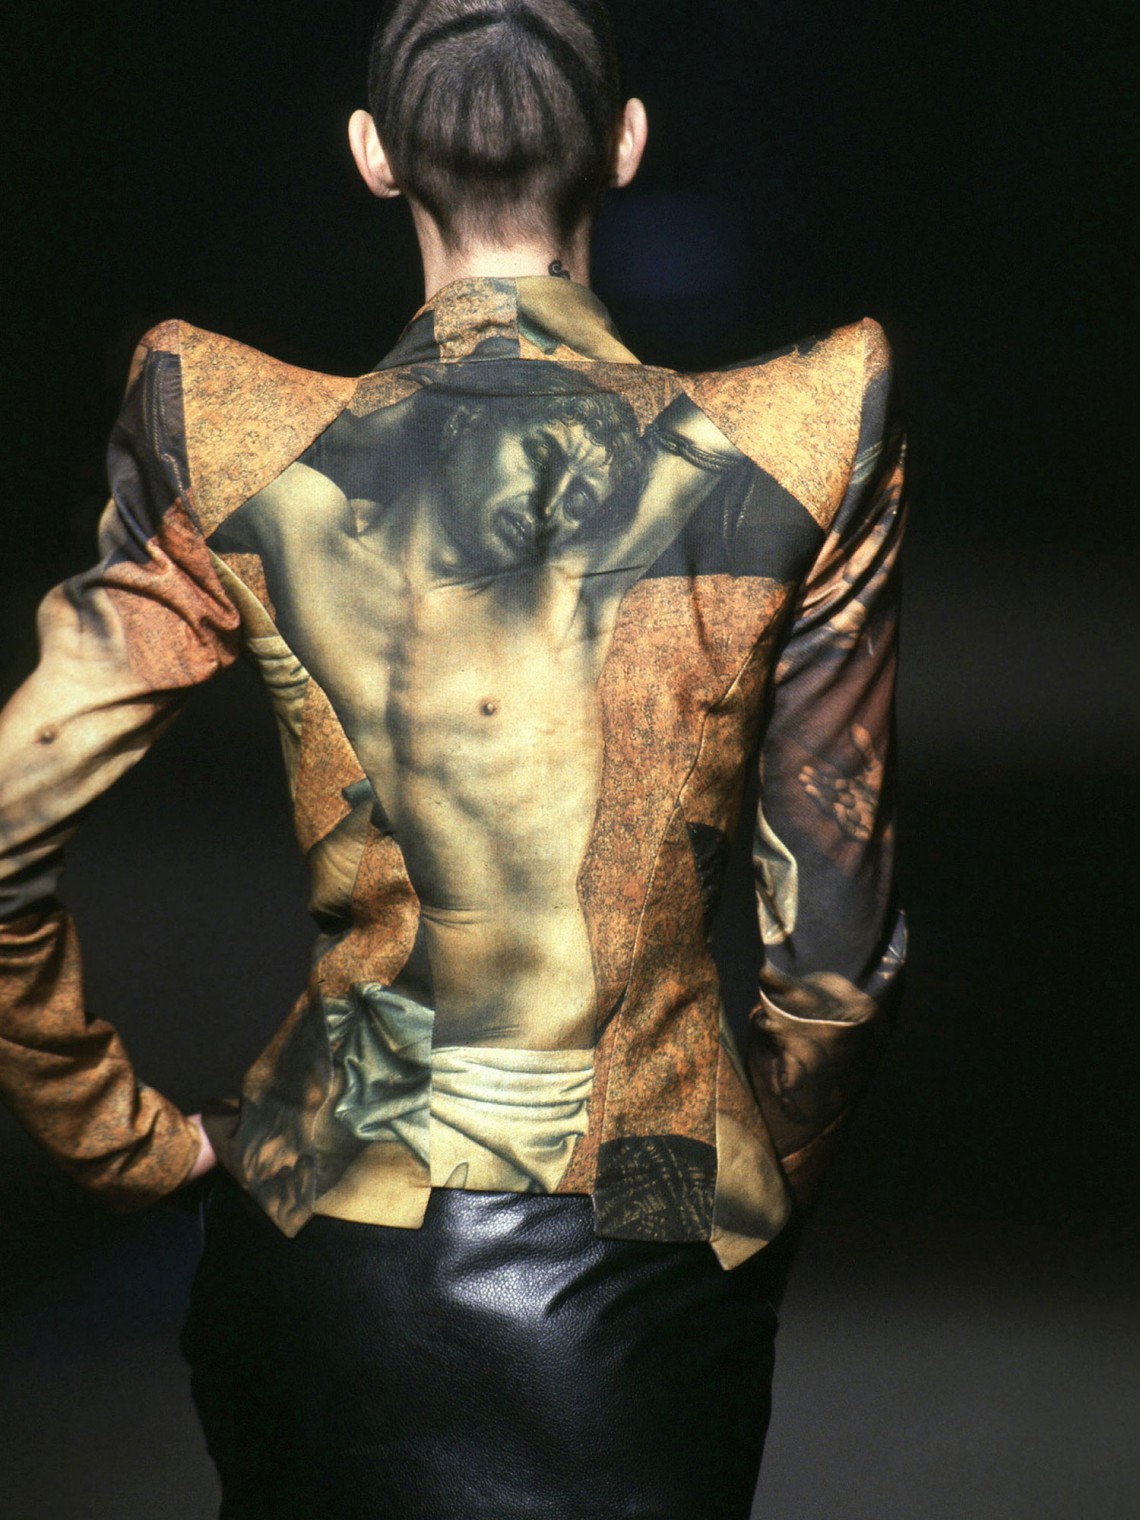 Jacket It's A Jungle Out There, A/W 1997-8 Alexander McQueen Image: firstVIEW